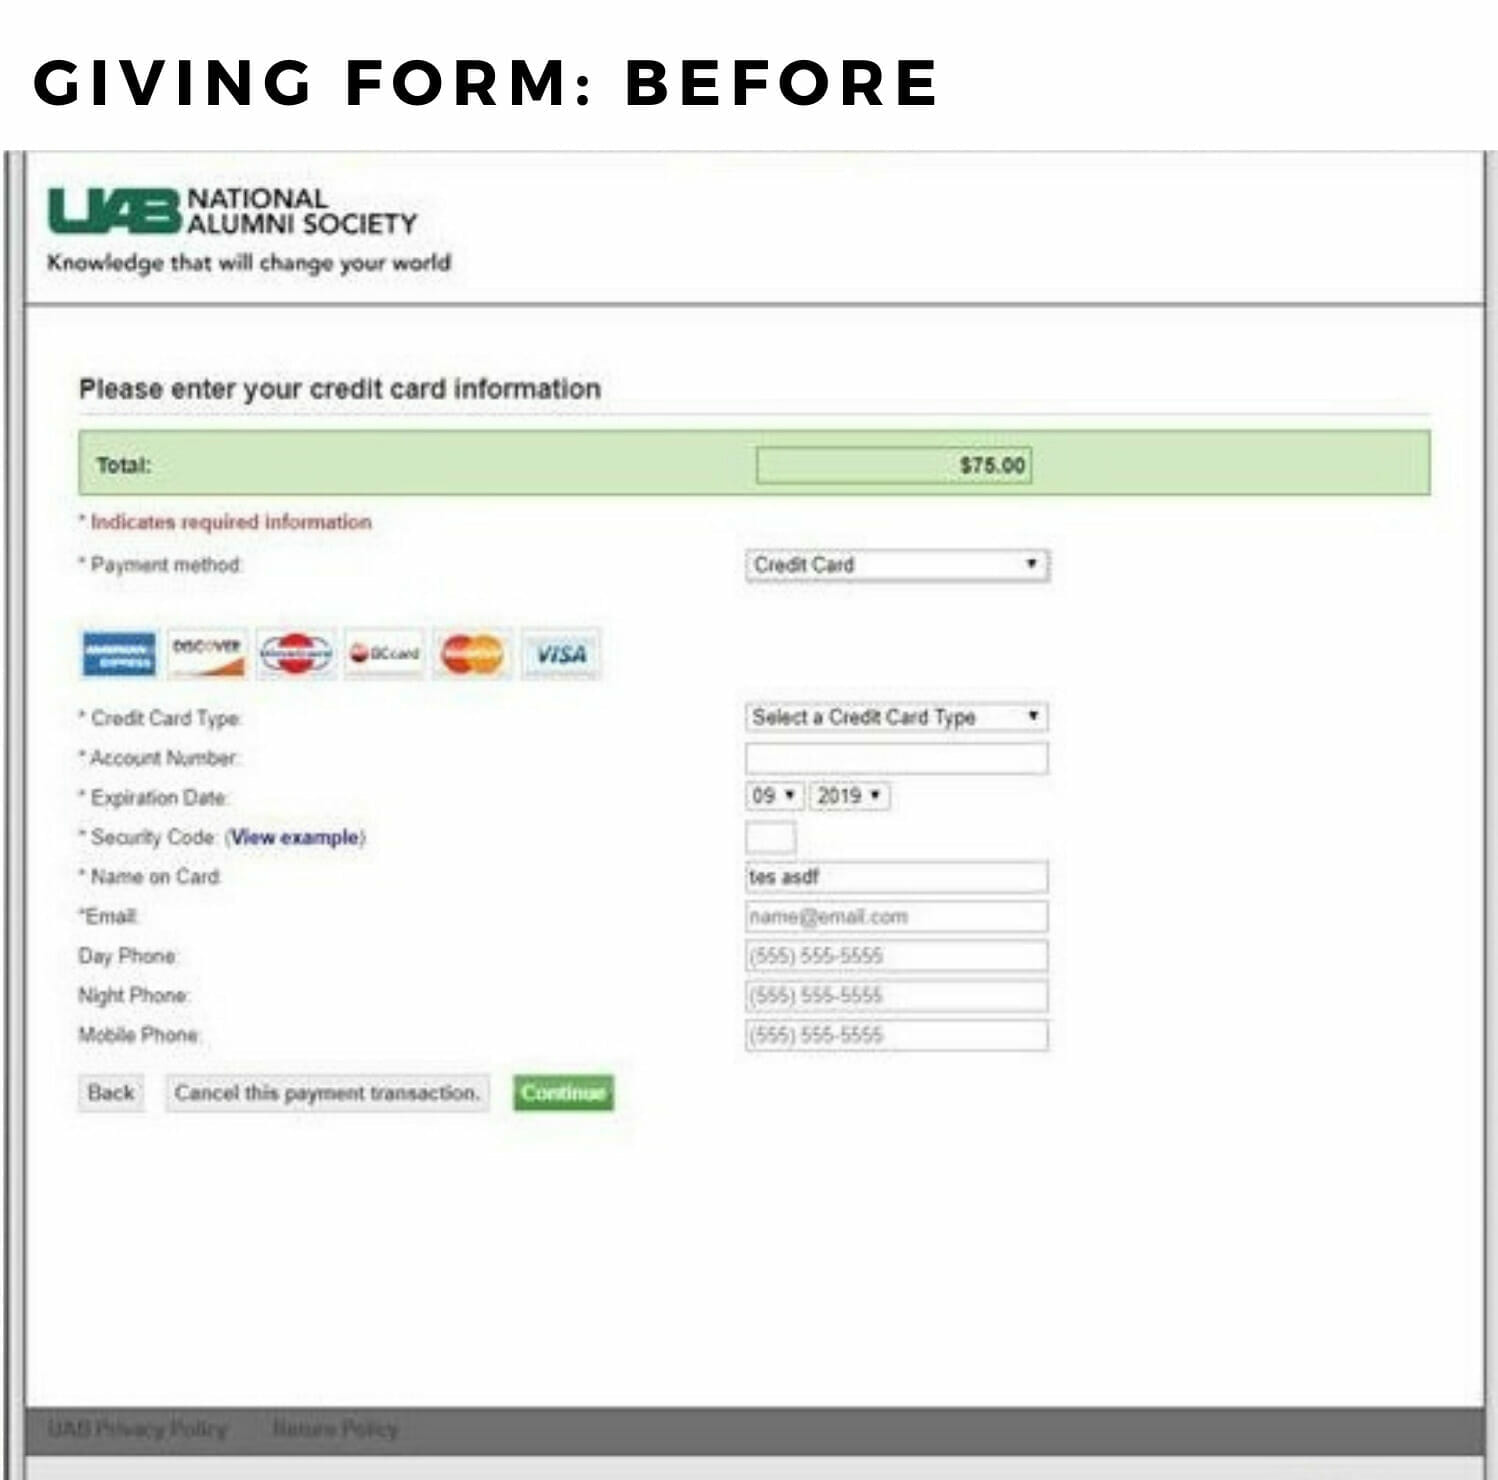 Screenshot of what the UAB Alumni website giving form looked like before implementation